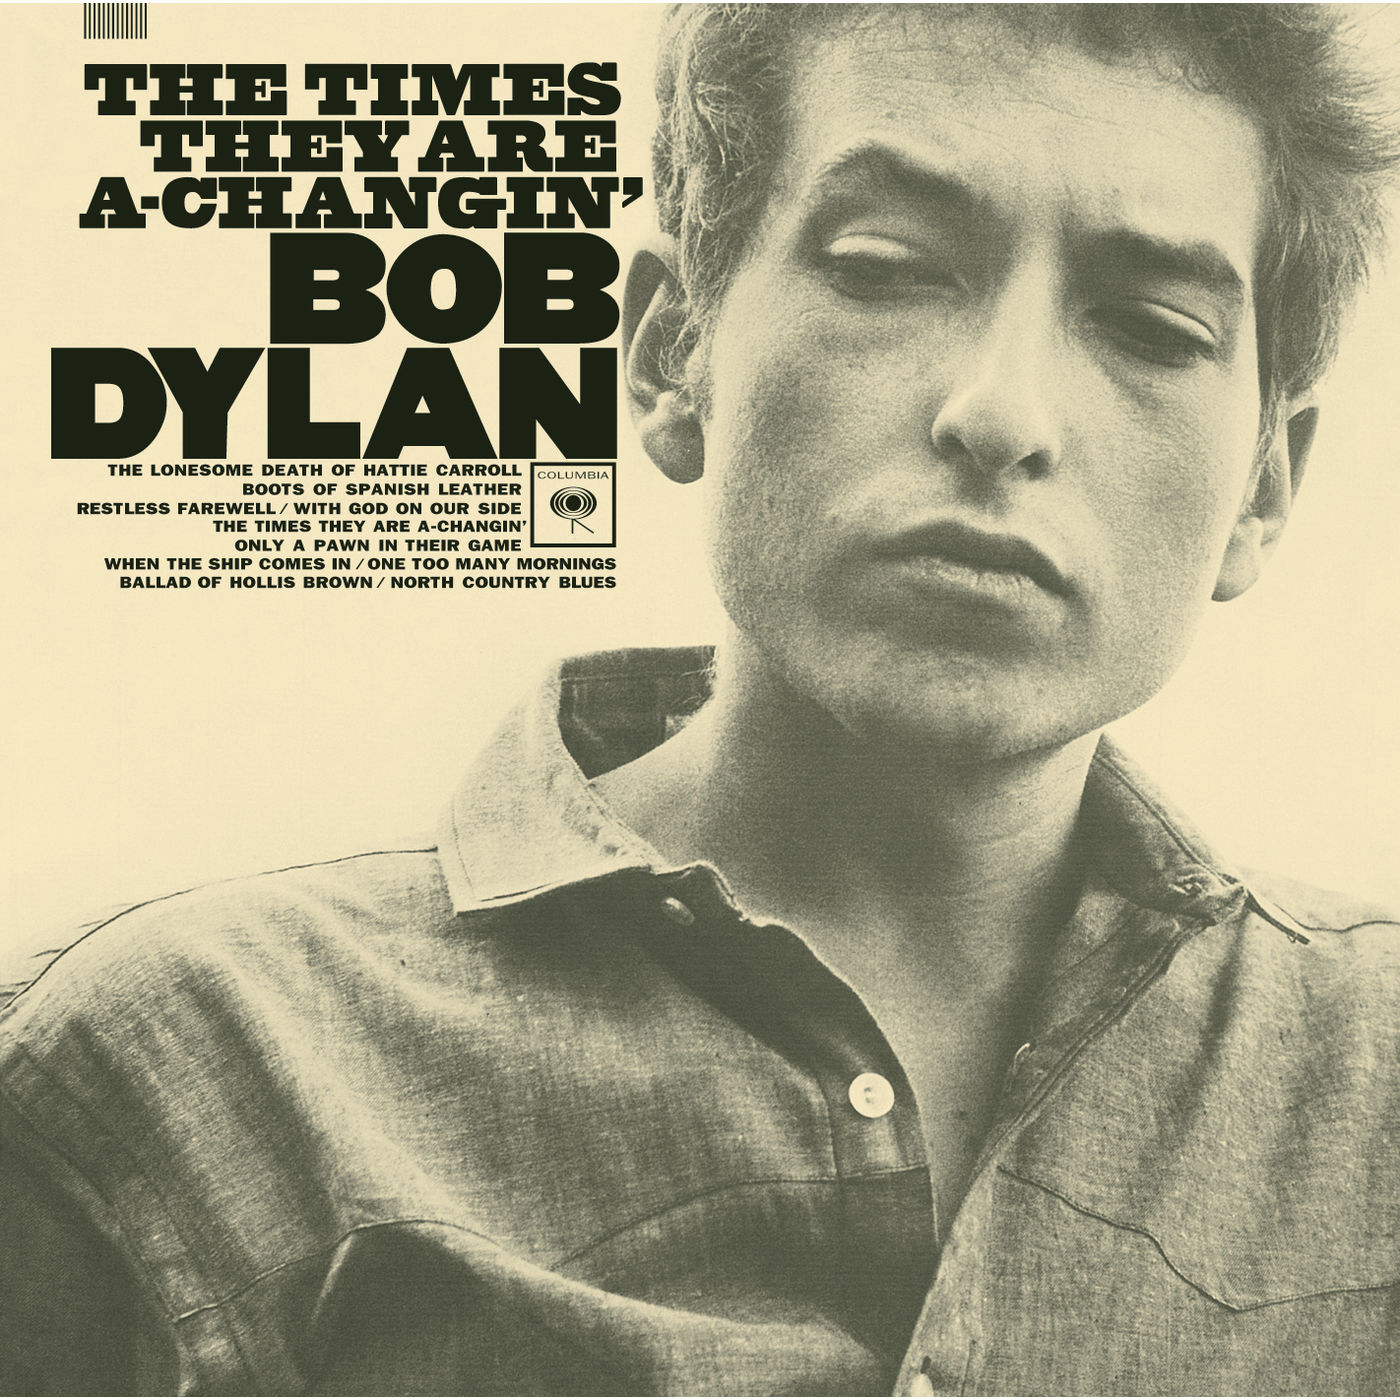 Bob Dylan - The Times They Are A-Changin’ (1964/2015) [FLAC 24bit/192kHz]